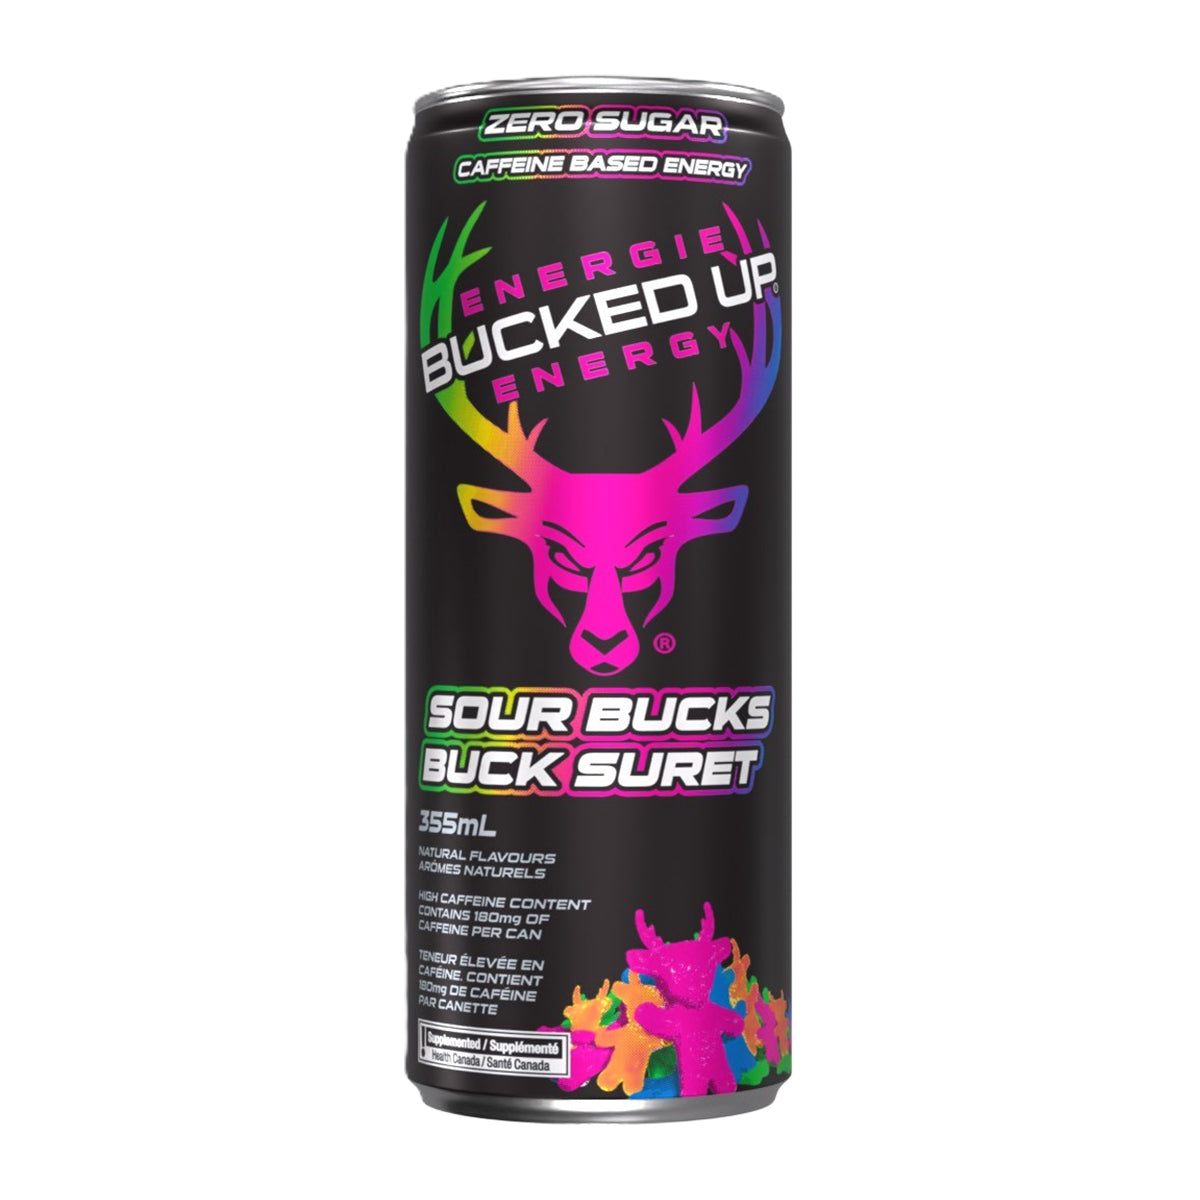 Bucked Up Energy Drink (1 can)